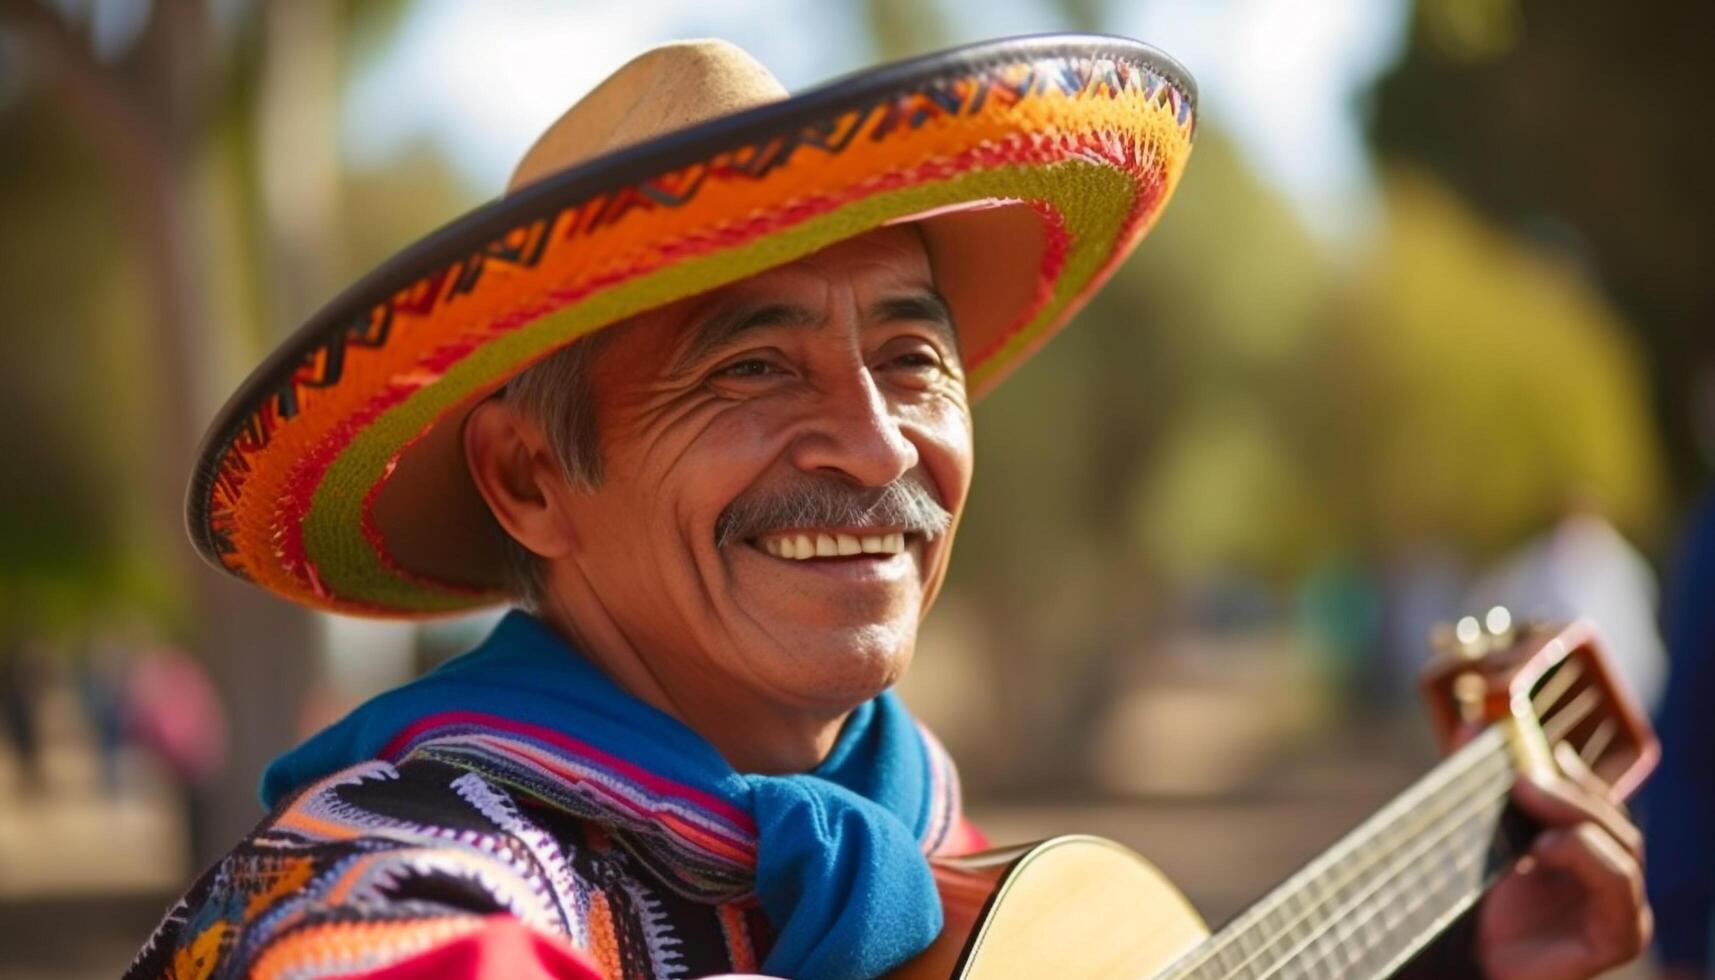 Cheerful musician with sombrero plays acoustic guitar outdoors generated by AI photo